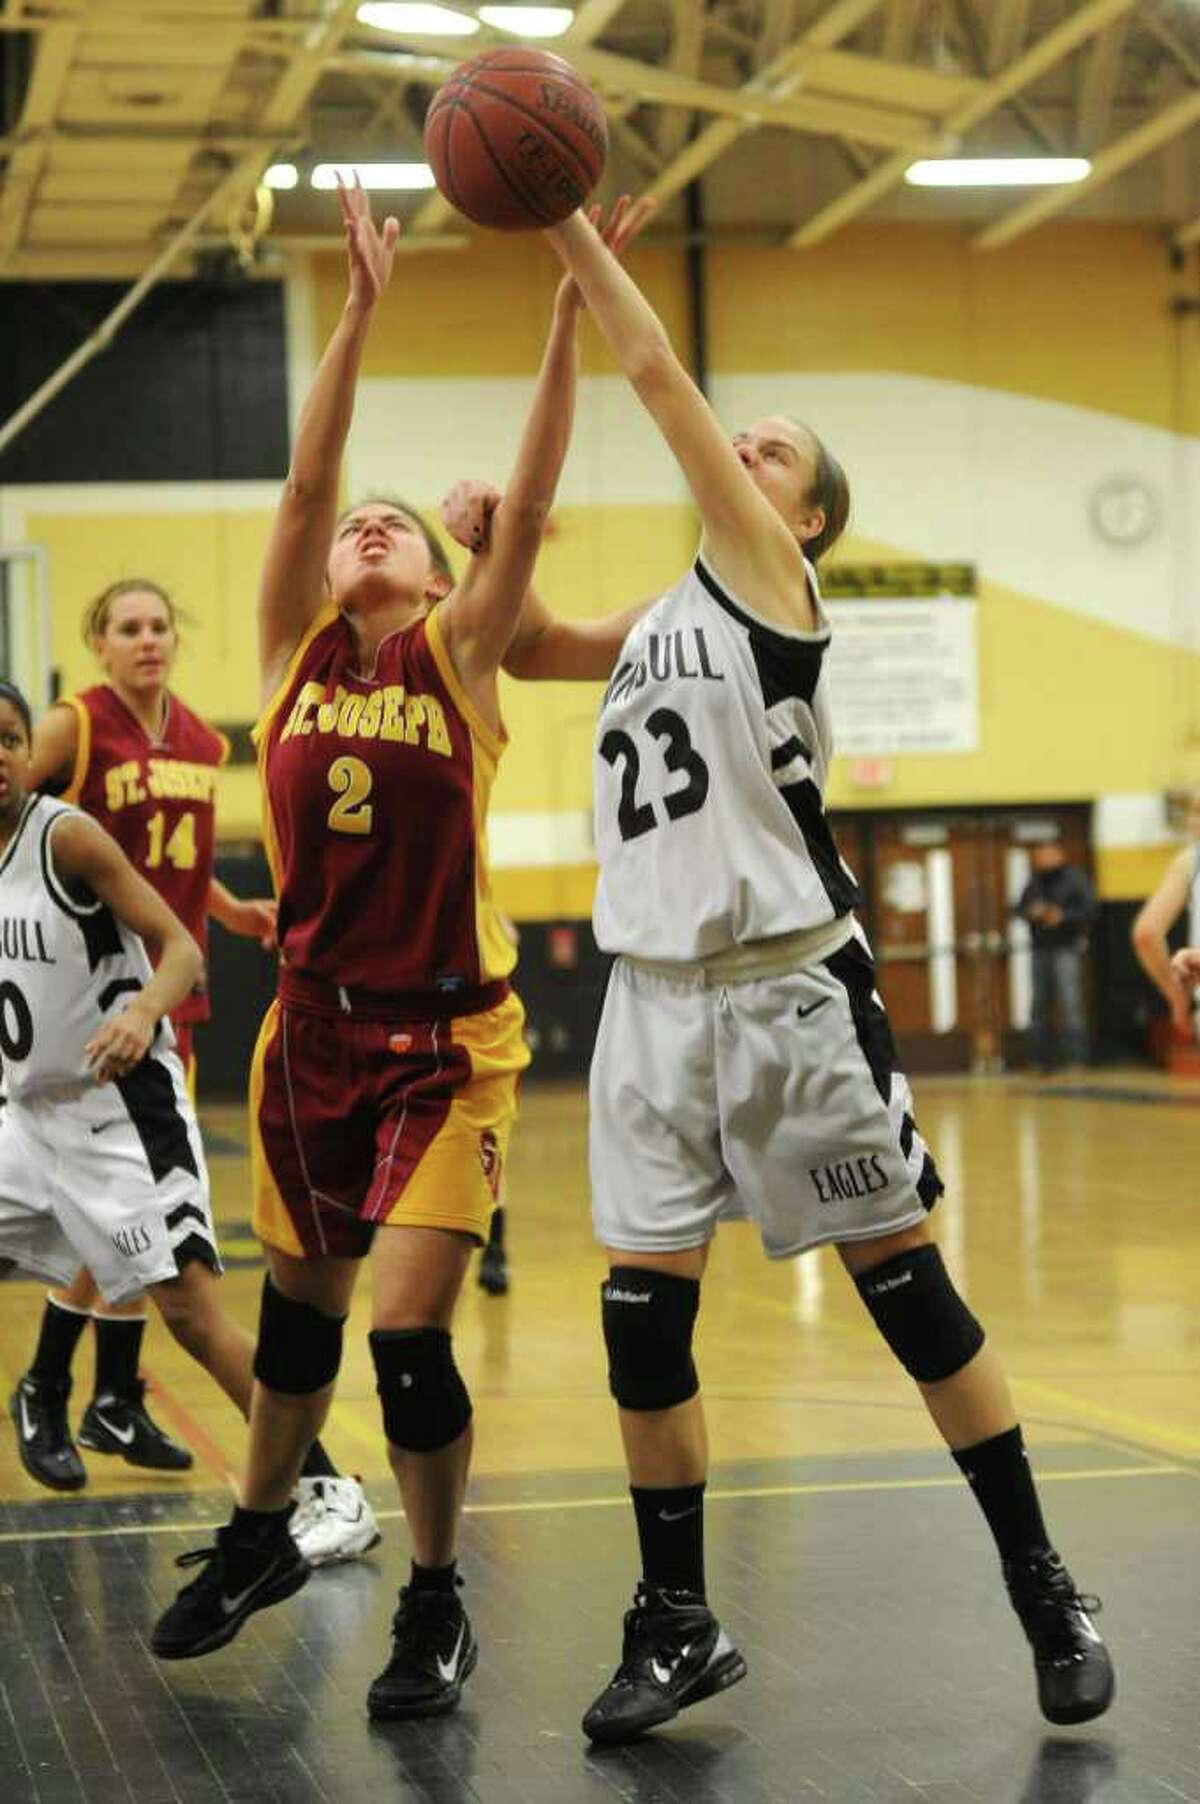 St. Joseph's Jess Jowdy, left, and Trumbull's Victoria Pfohl, right, reach for a rebound during Tuesday's game at Trumbull High School on January 25, 2011.